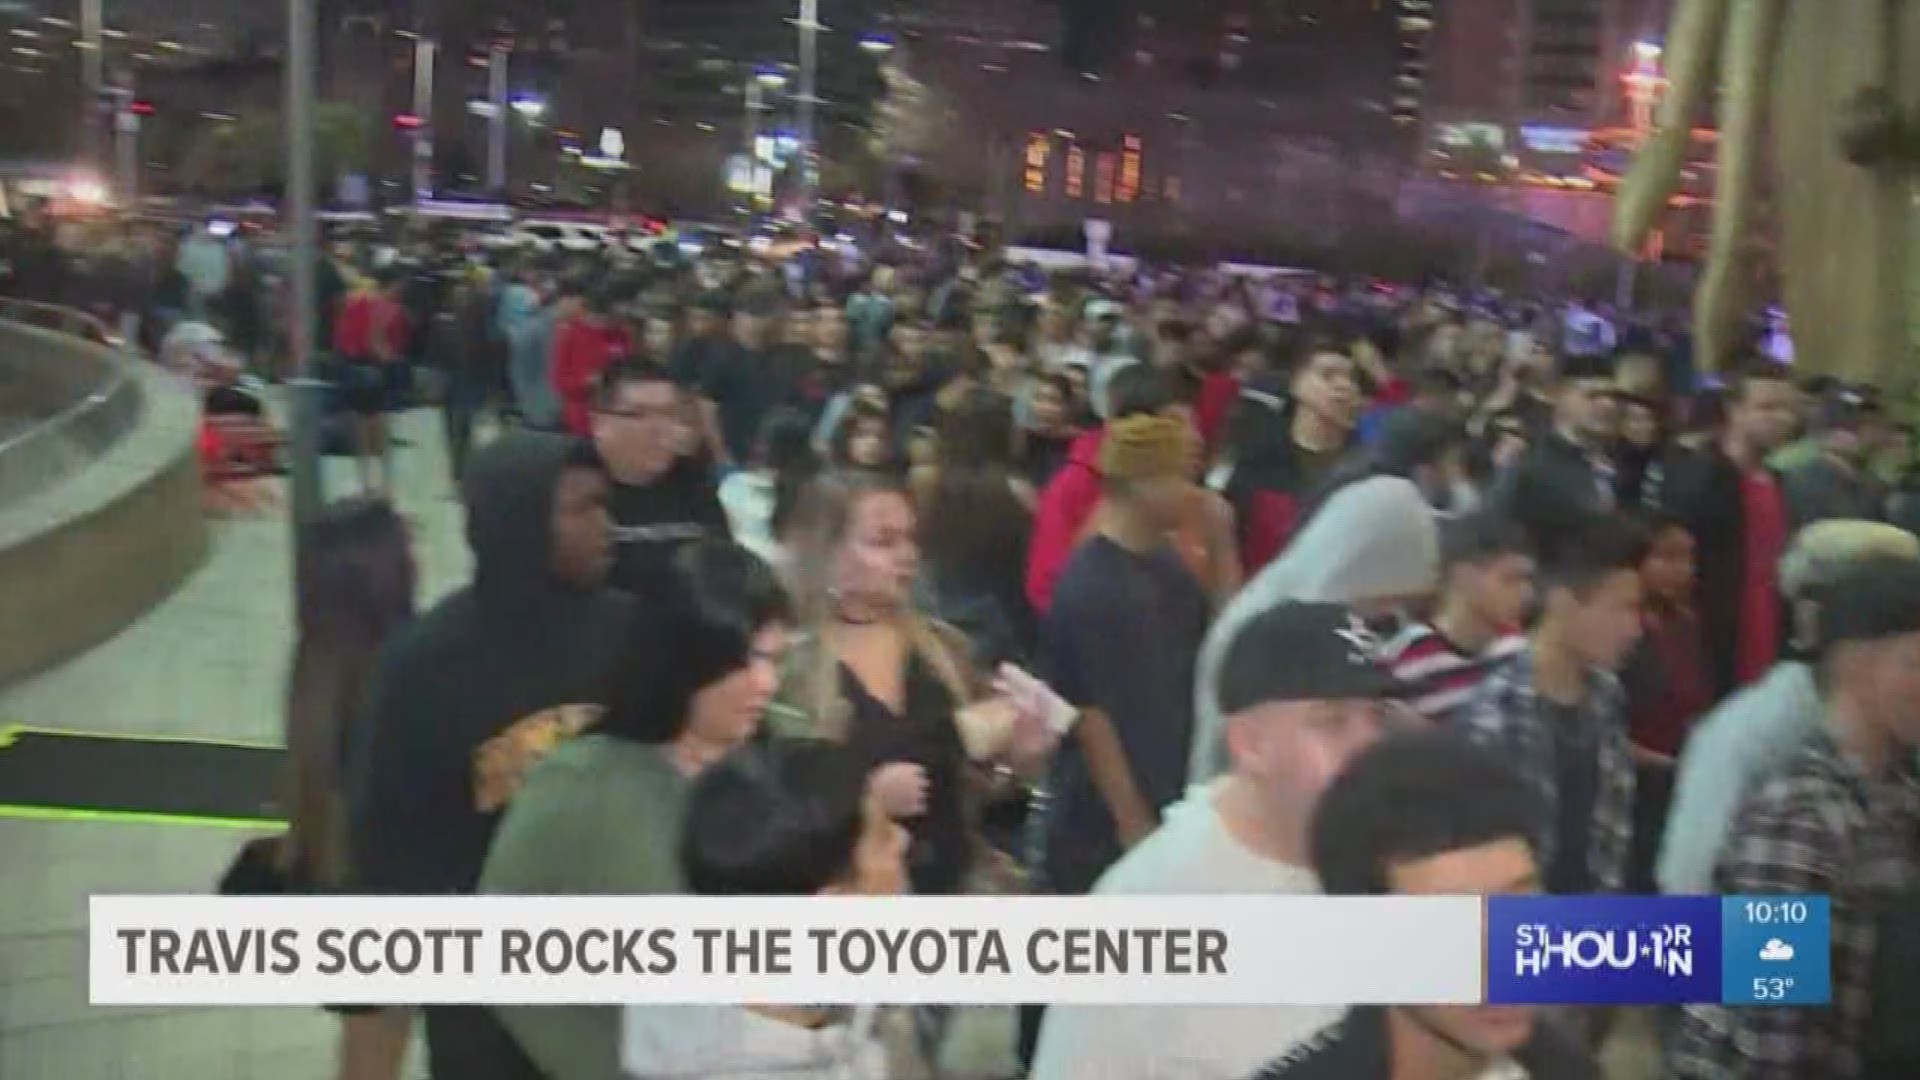 Travis Scott fans stood in line for almost 10 hours to see the rapper perform at his sold out show at the Toyota Center. This is Scott's second leg of his Astroworld tour.